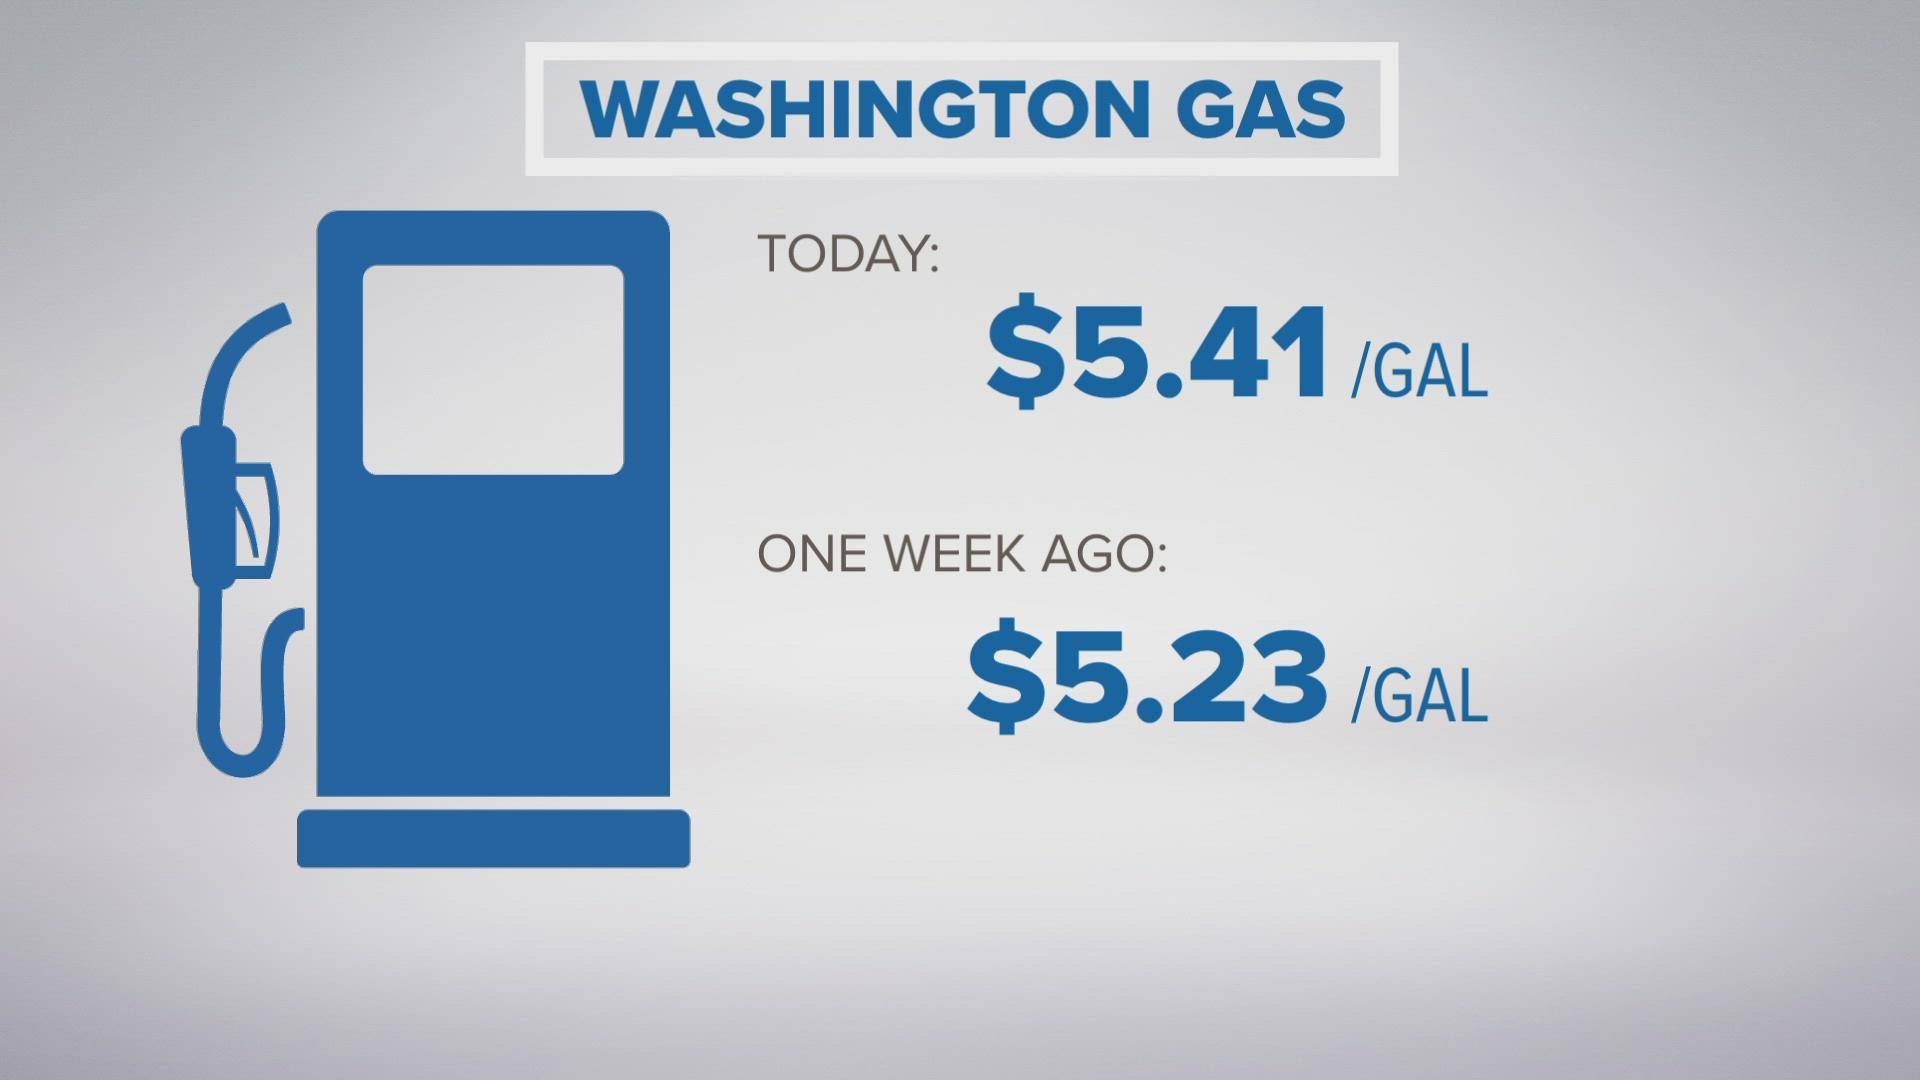 Gas prices in Washington have reached $5.41 per gallon, up 18 cents from one week ago.